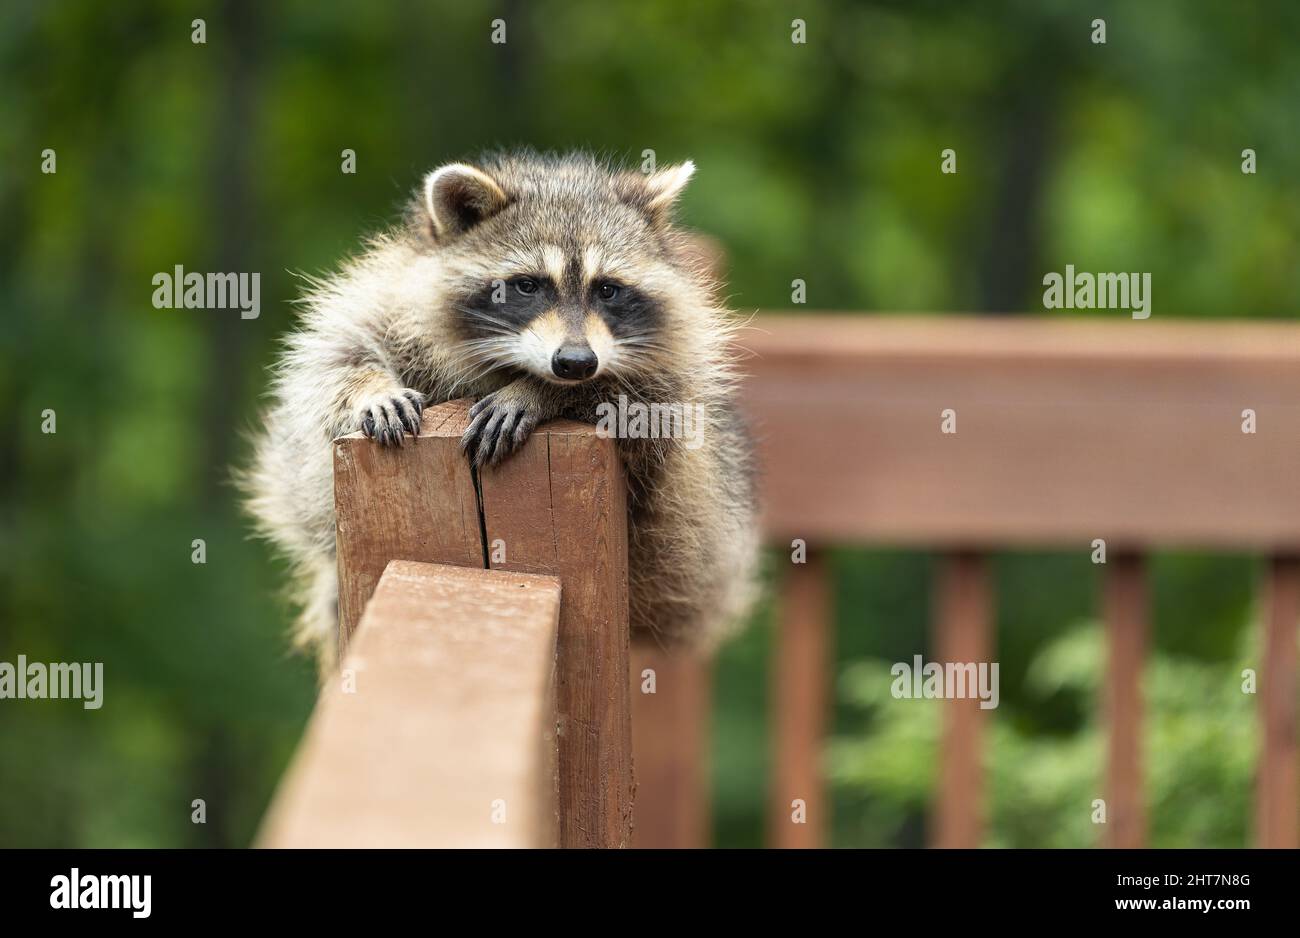 Baby raccoon resting on wooden deck railing against a green blurred background. Stock Photo